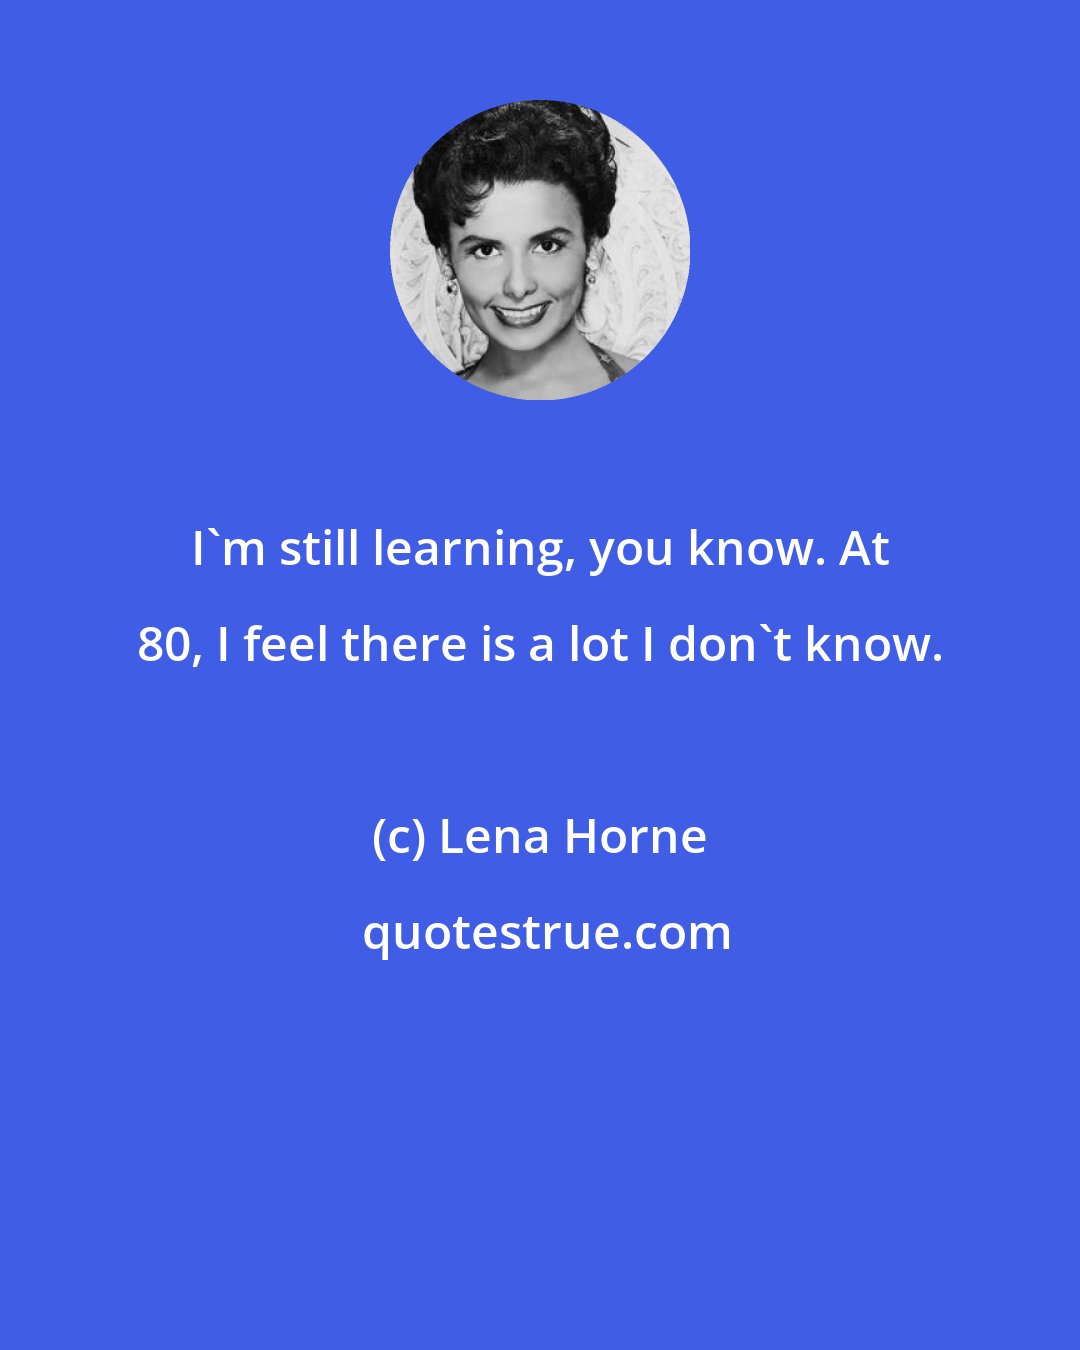 Lena Horne: I'm still learning, you know. At 80, I feel there is a lot I don't know.